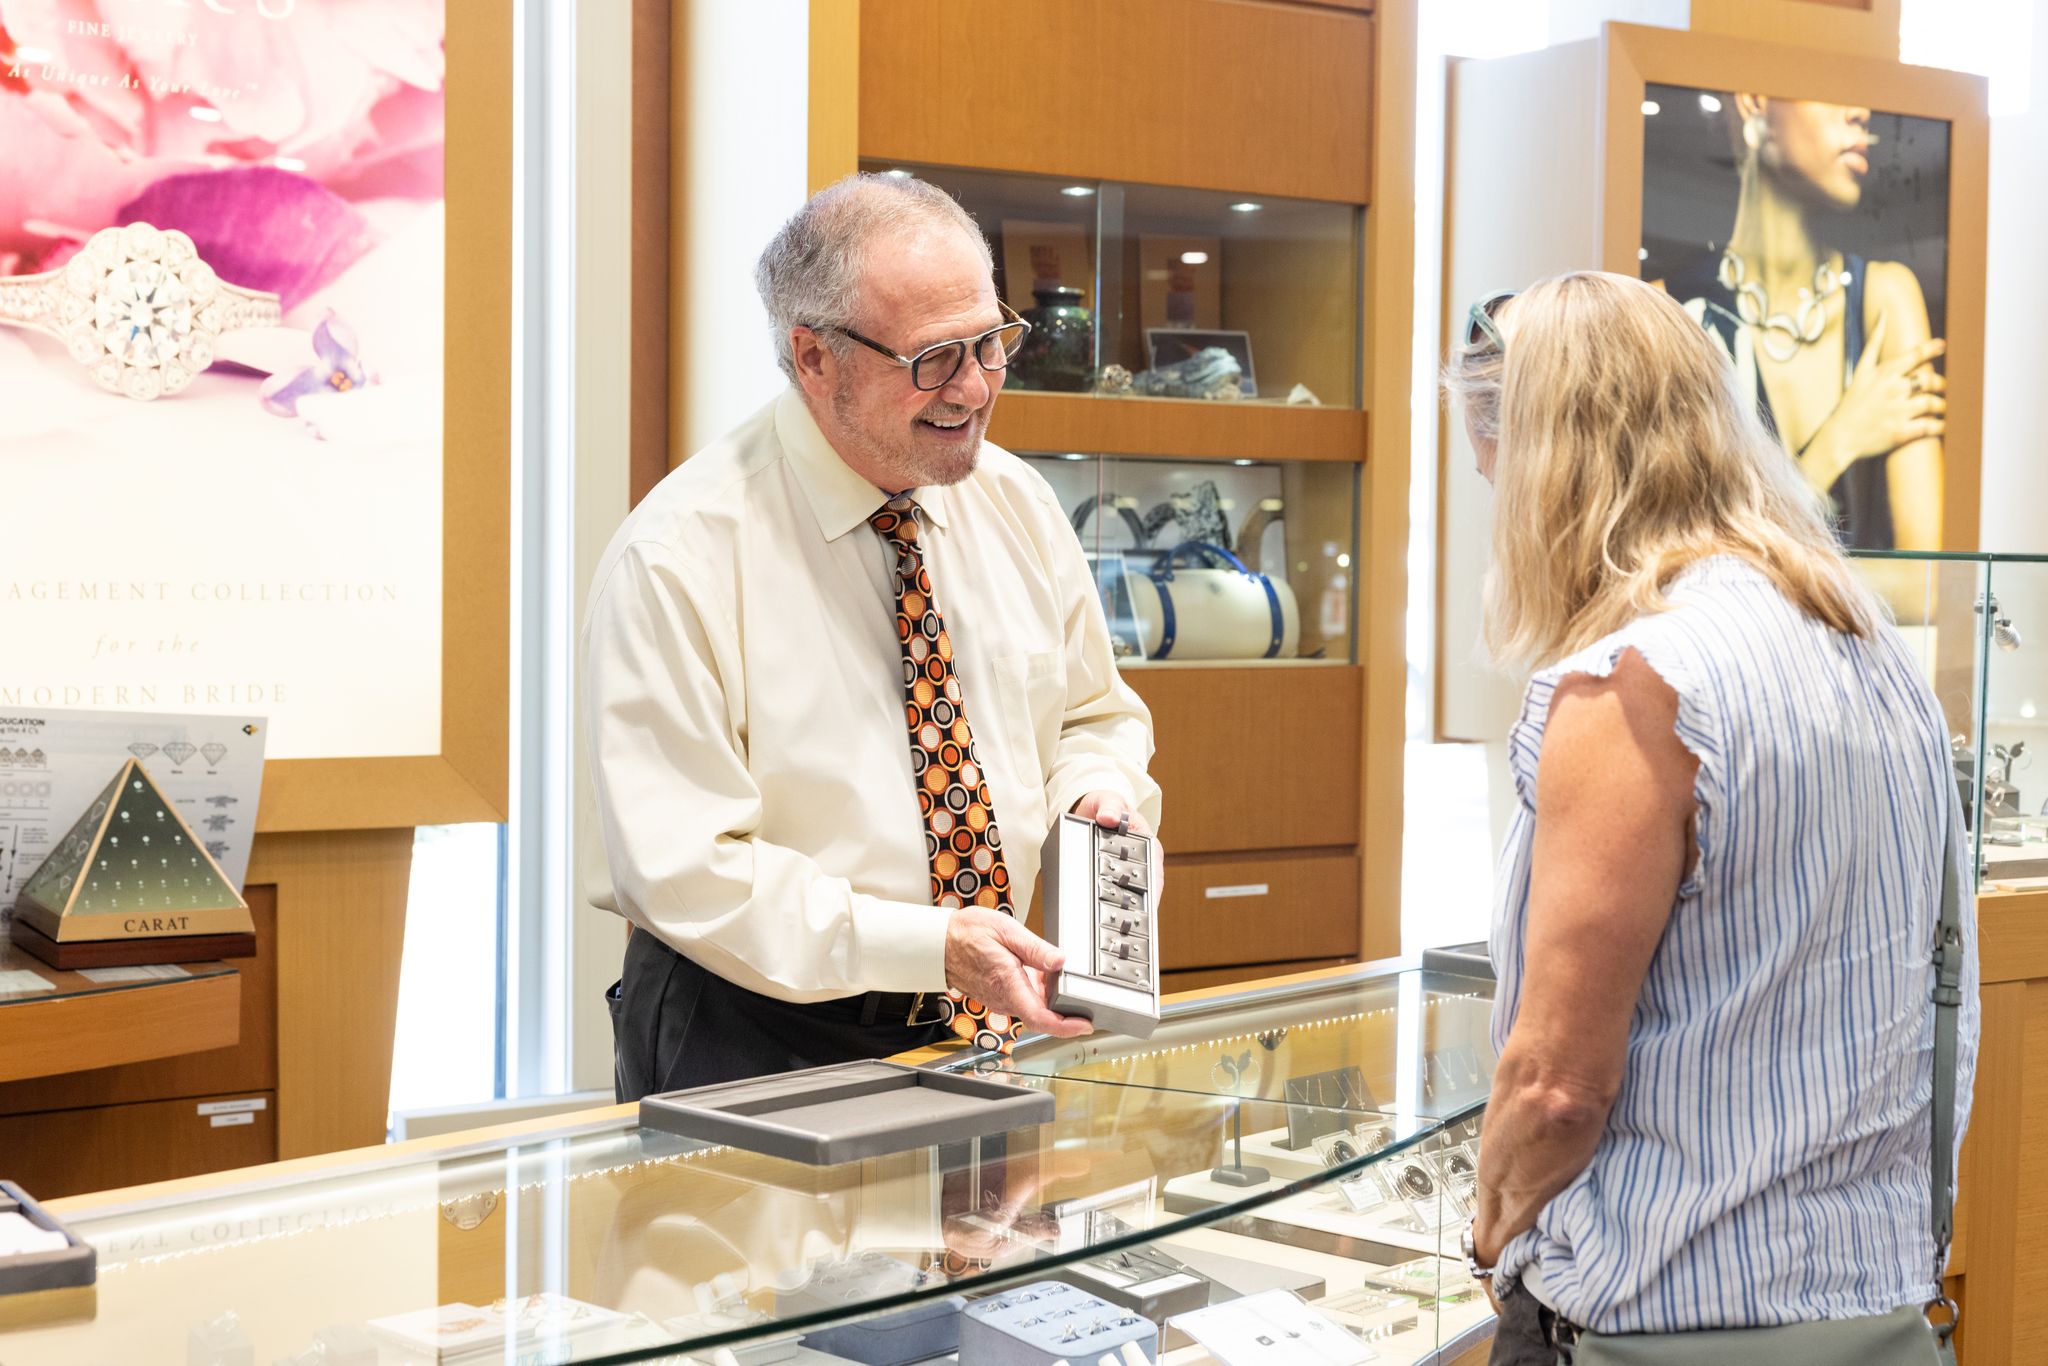 Gary Simon, owner of Simon Jewelers, shows a customer a product in his jewelry store.